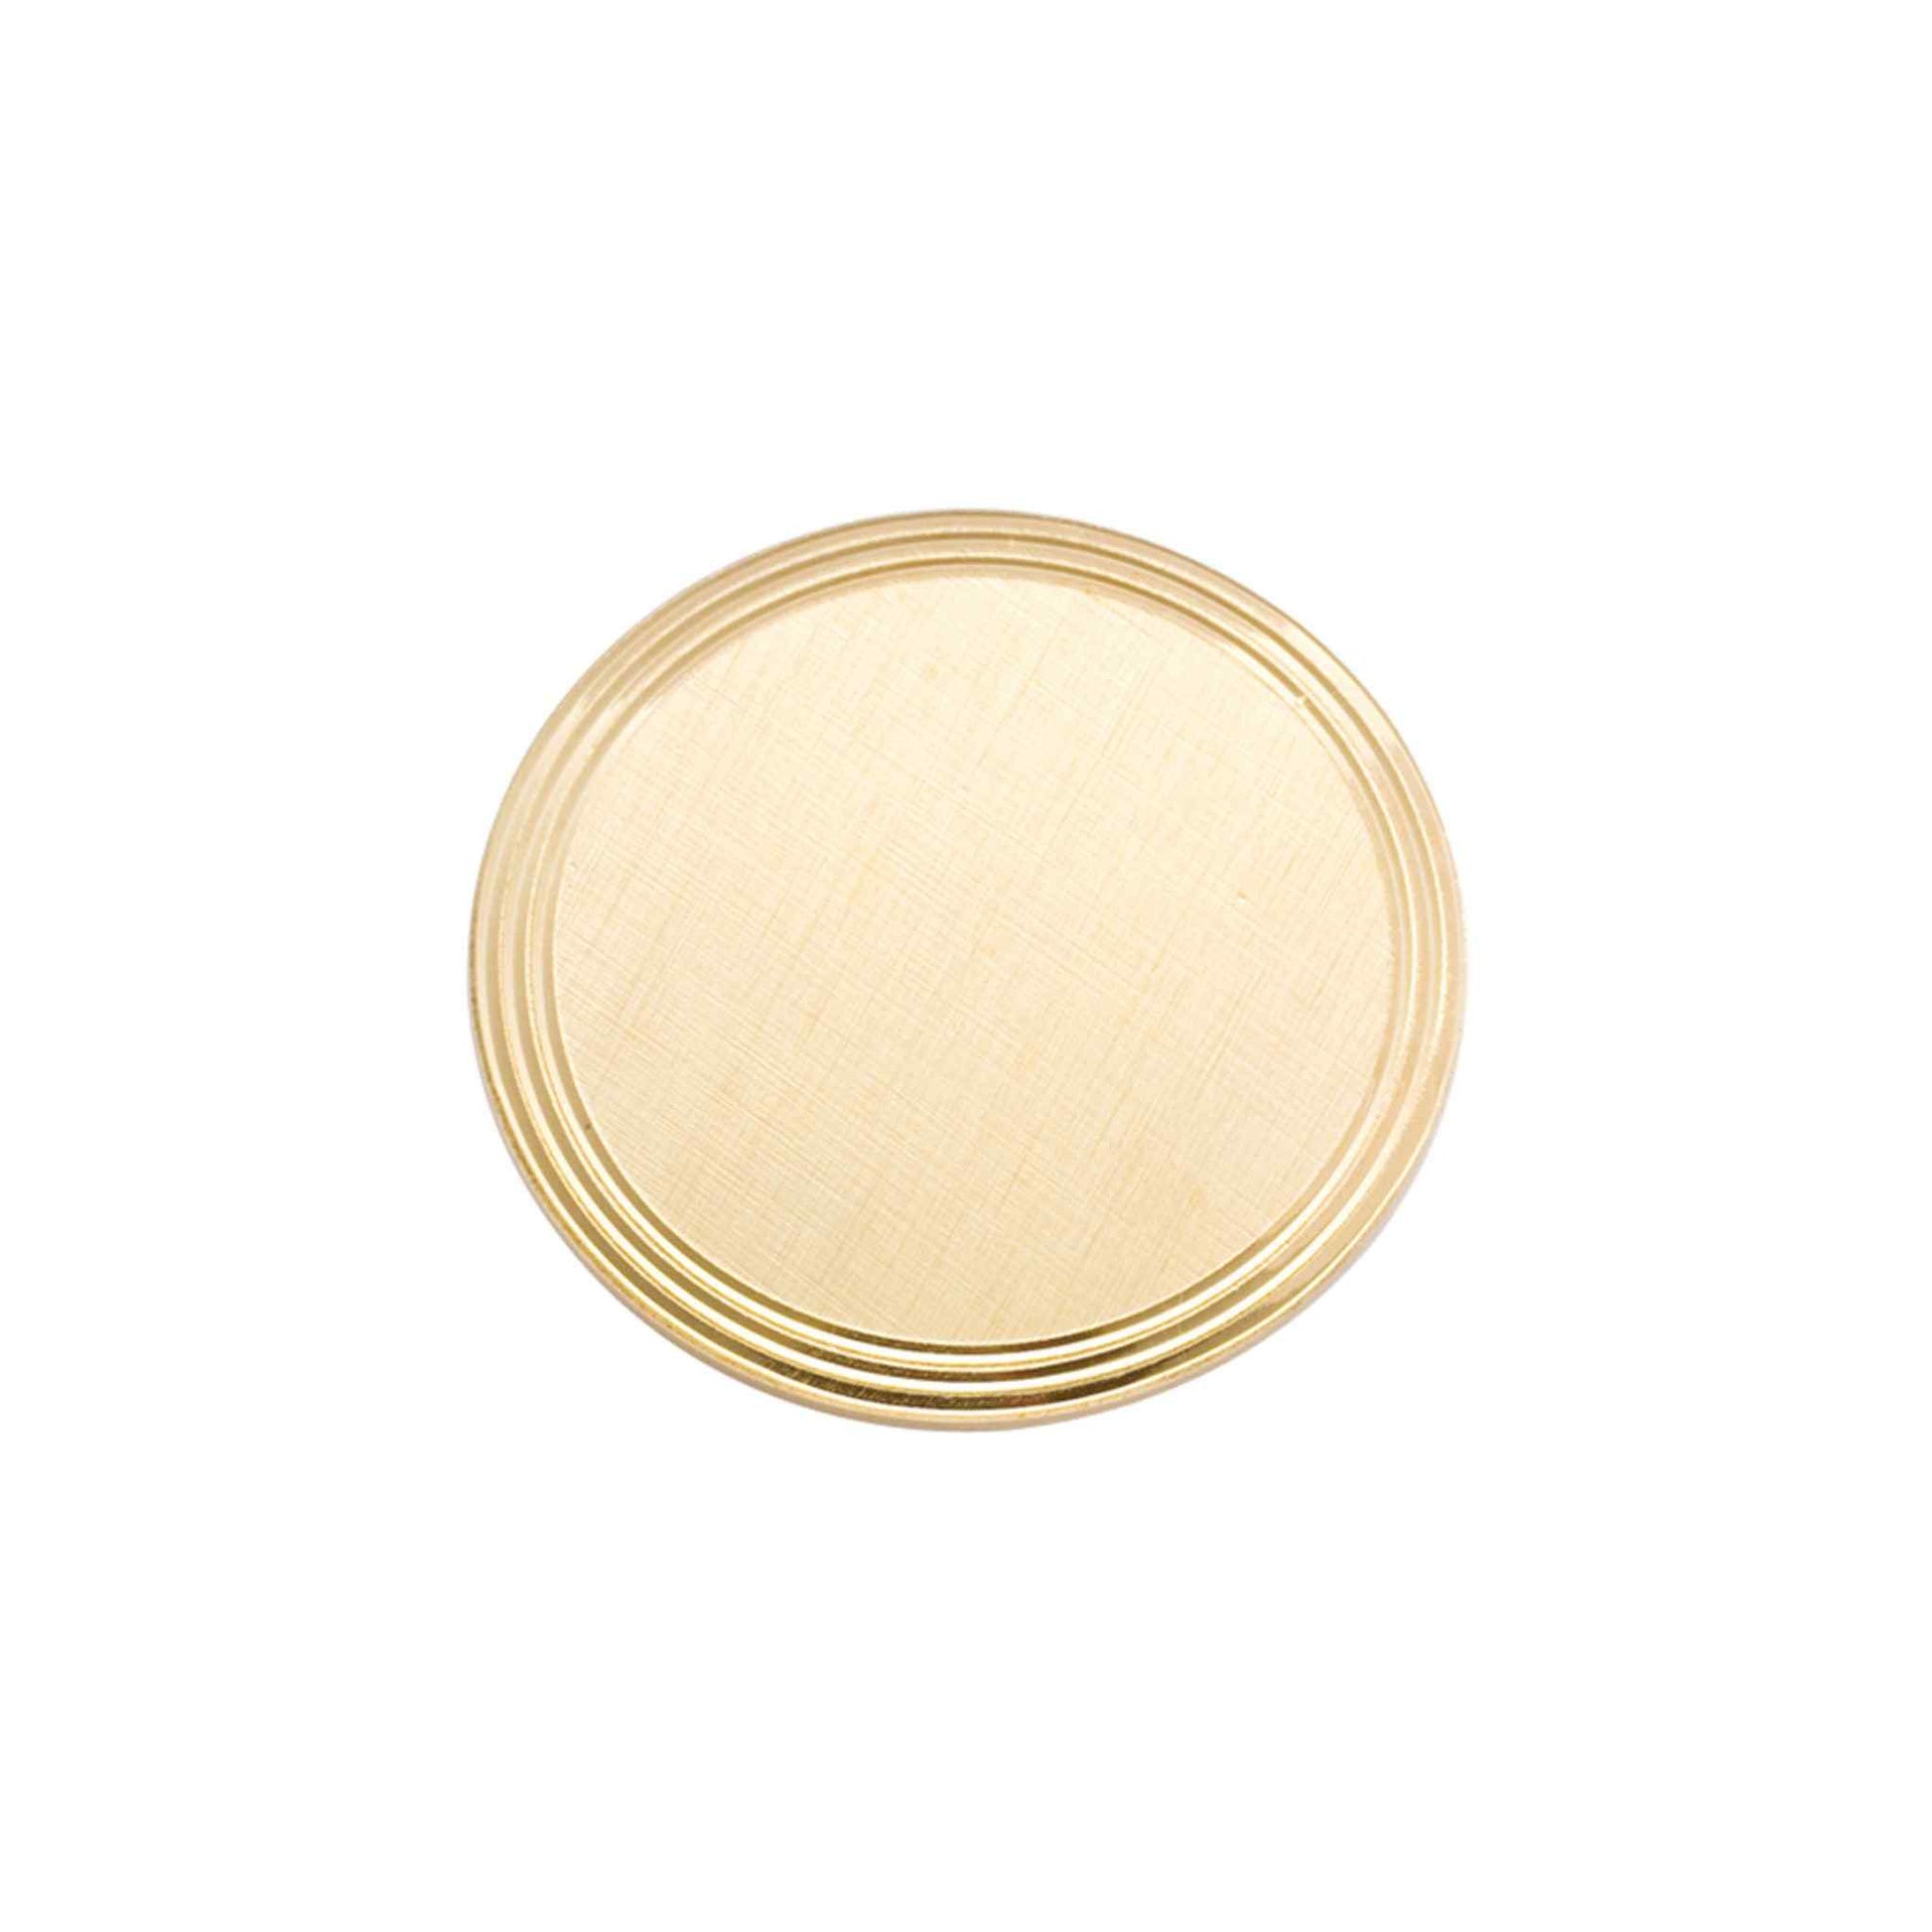 A round florentine finish pin with three ring edge displayed on a neutral white background.